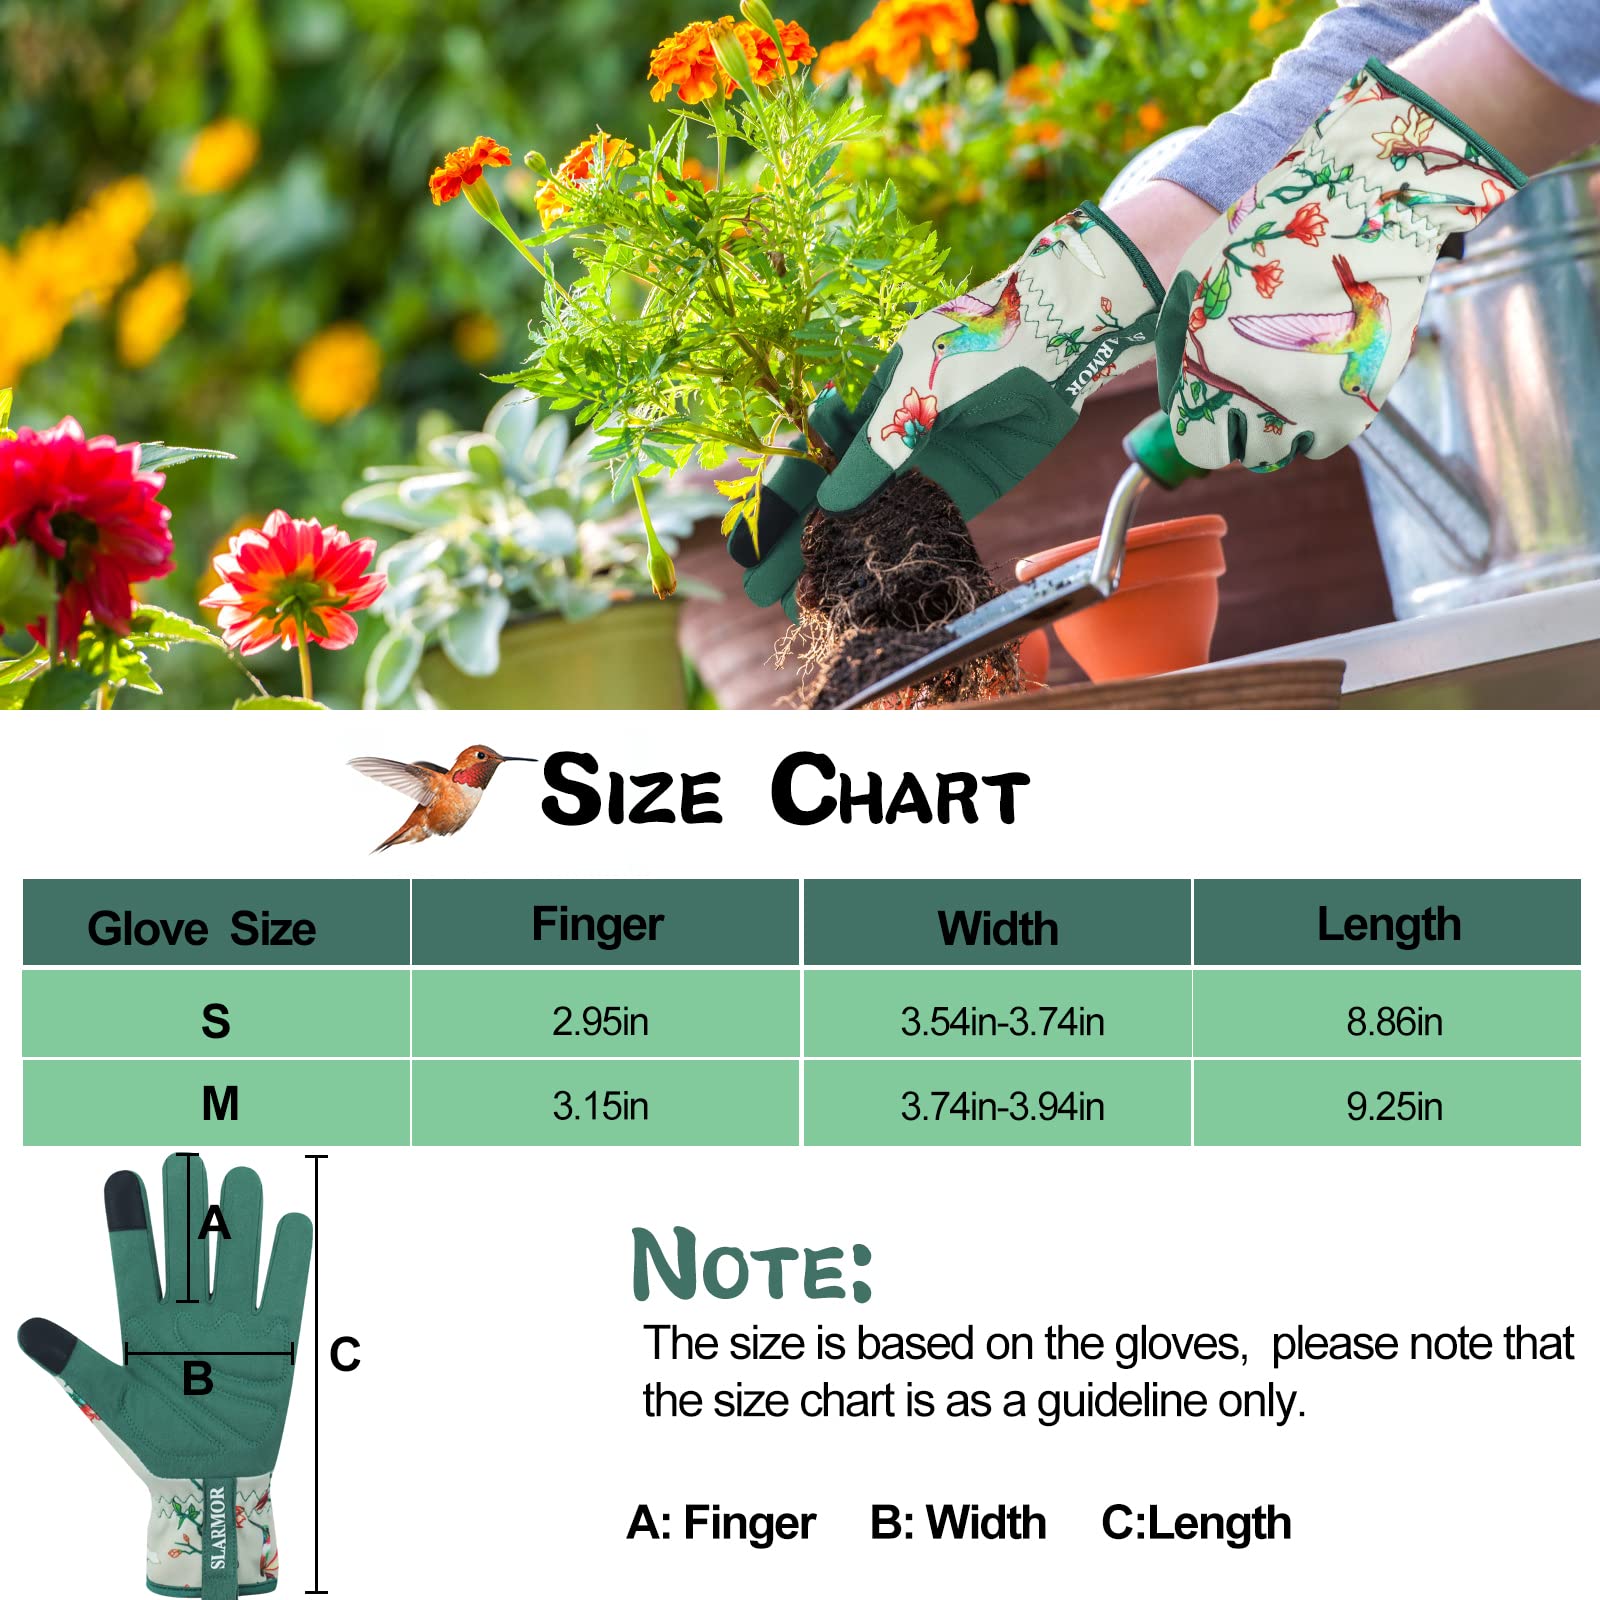 SLARMOR Leather-Gardening-Gloves for Women - Thorn-Proof Work-Gloves with Touch Screen for Weeding, Digging, Planting,Pruning Yard garden Gloves -Medium